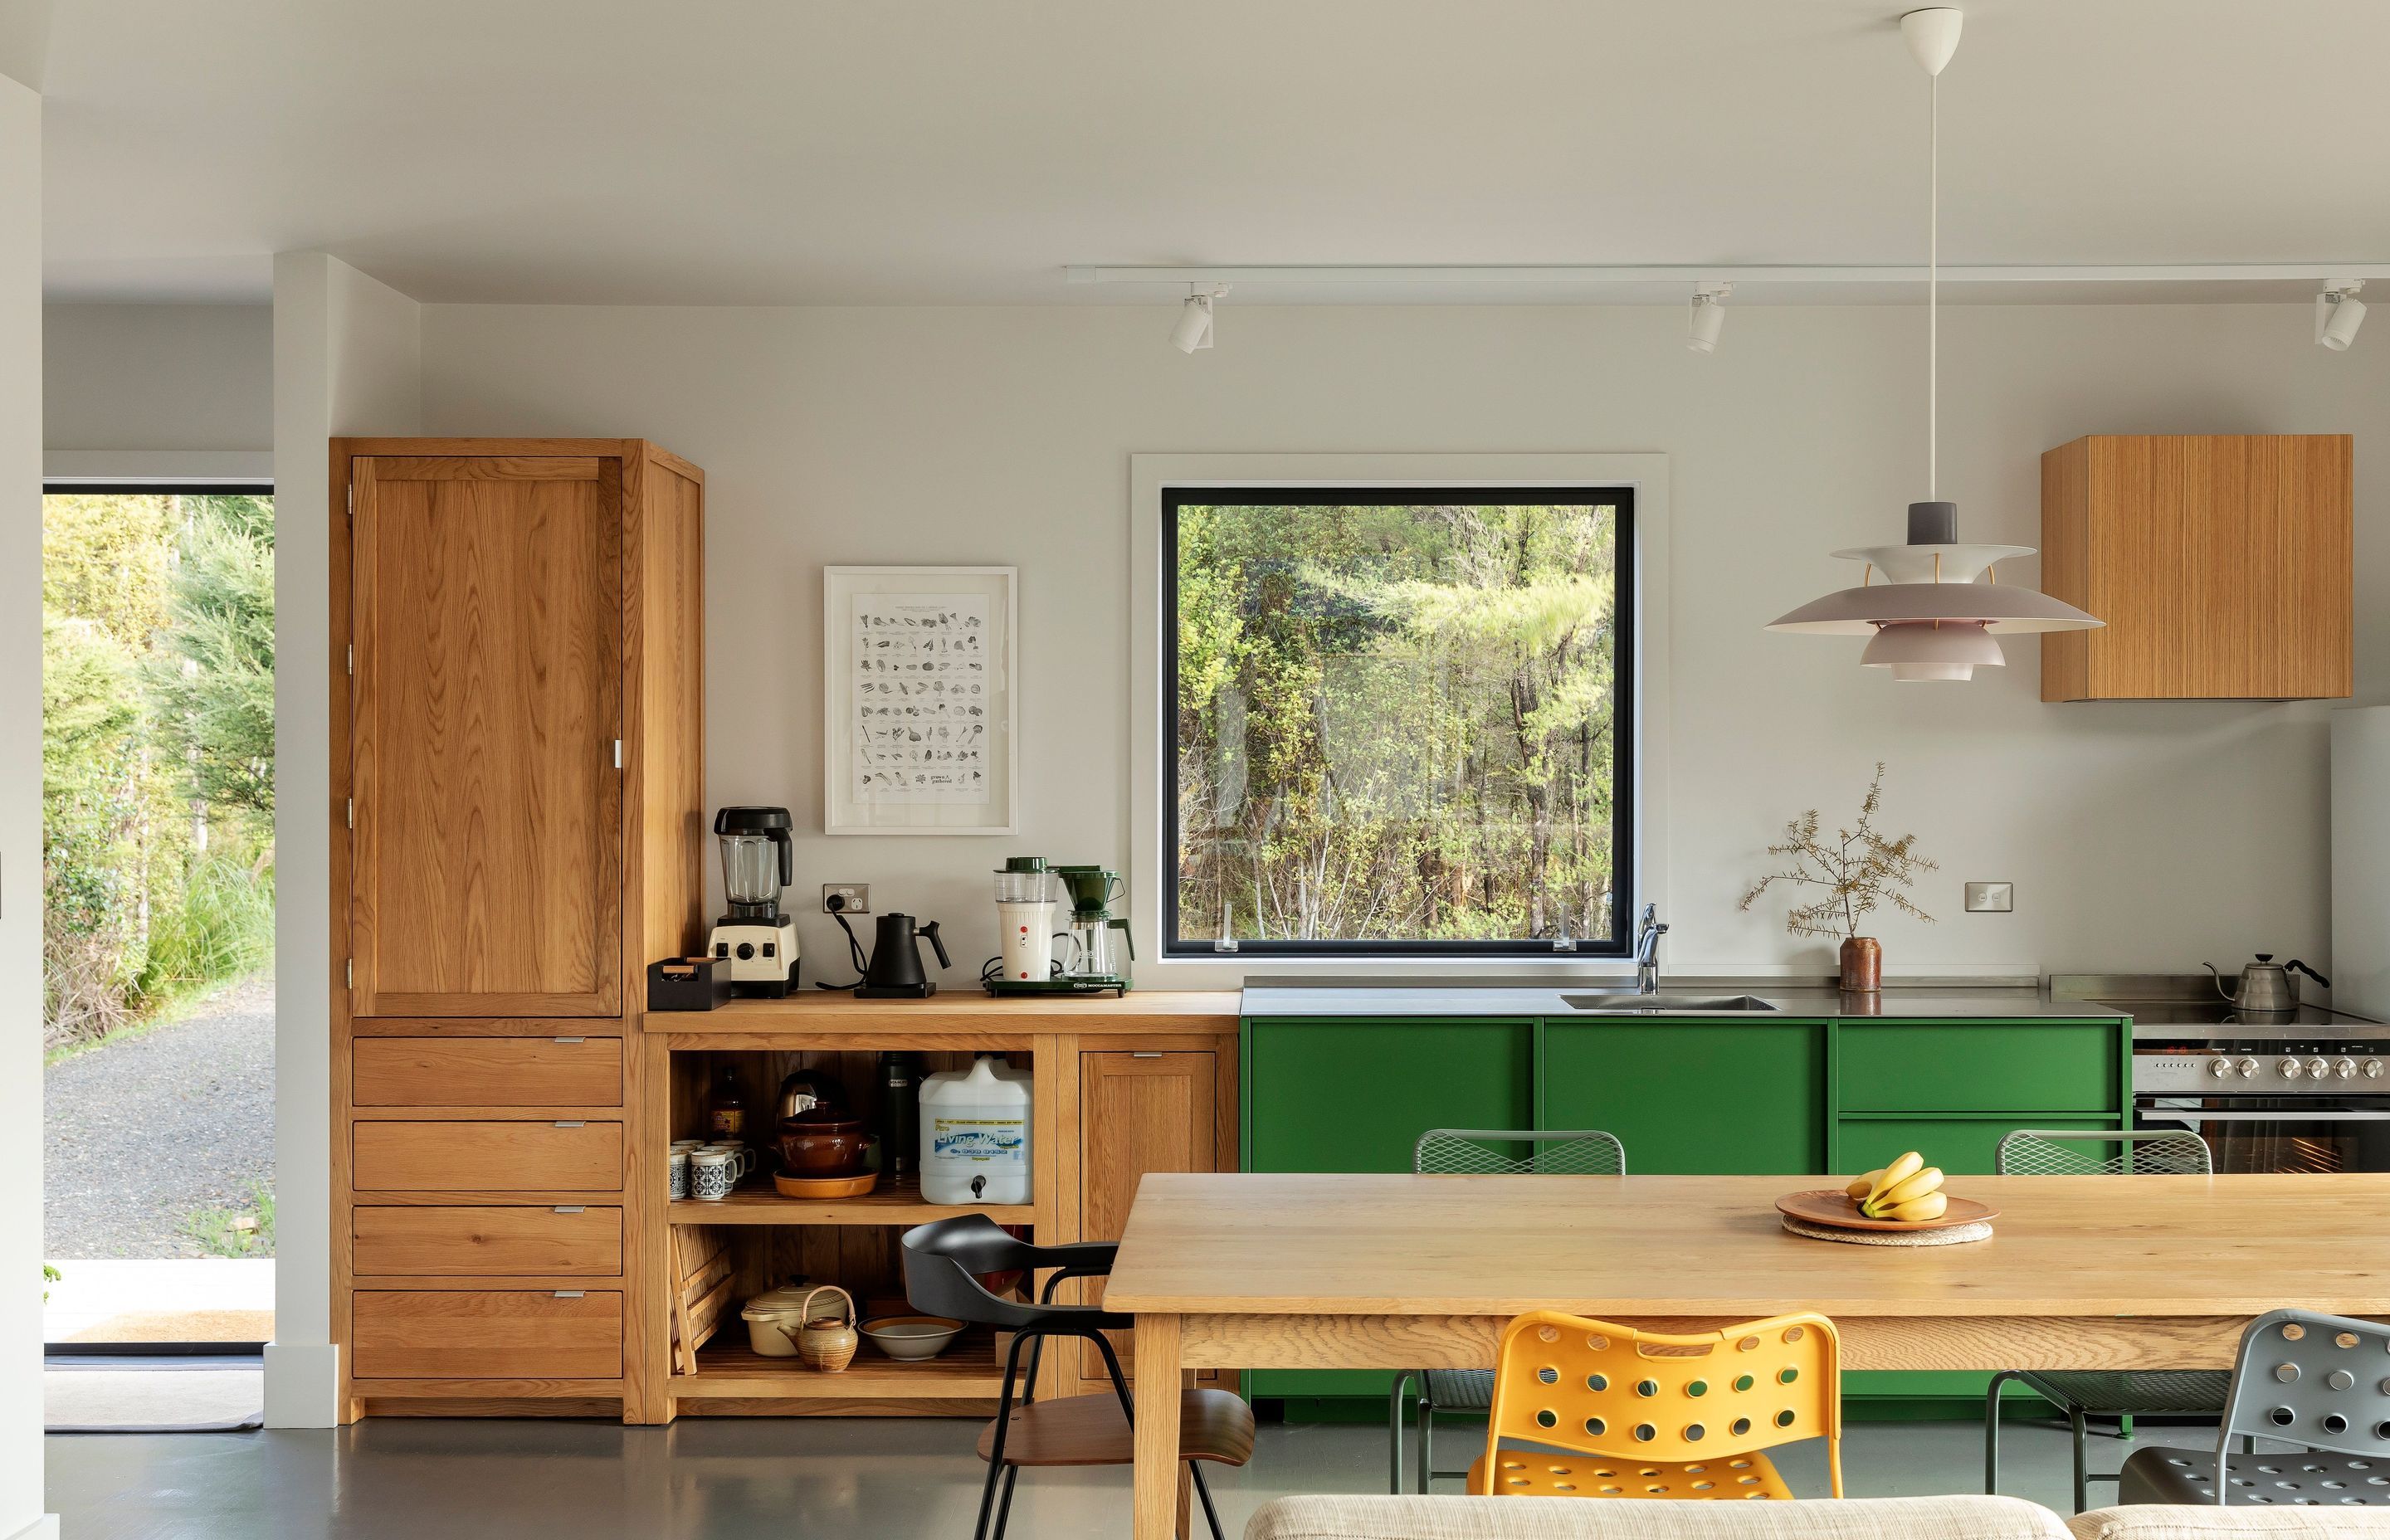 The kitchen is a simple medley of green and timber, while the dining table doubles as the client's main home wordspace. 